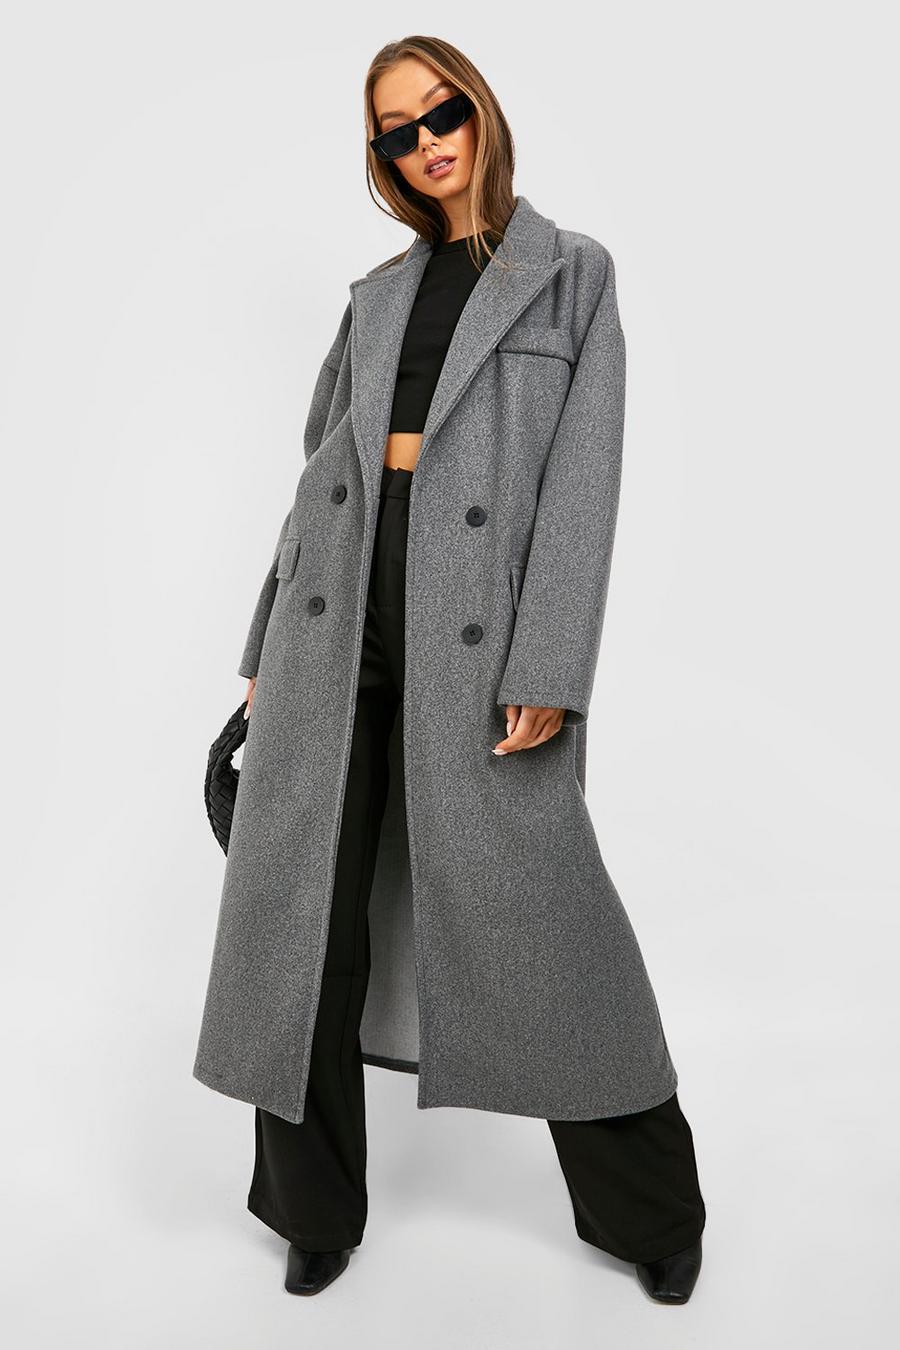 Charcoal grey Double Breasted Wool Coat